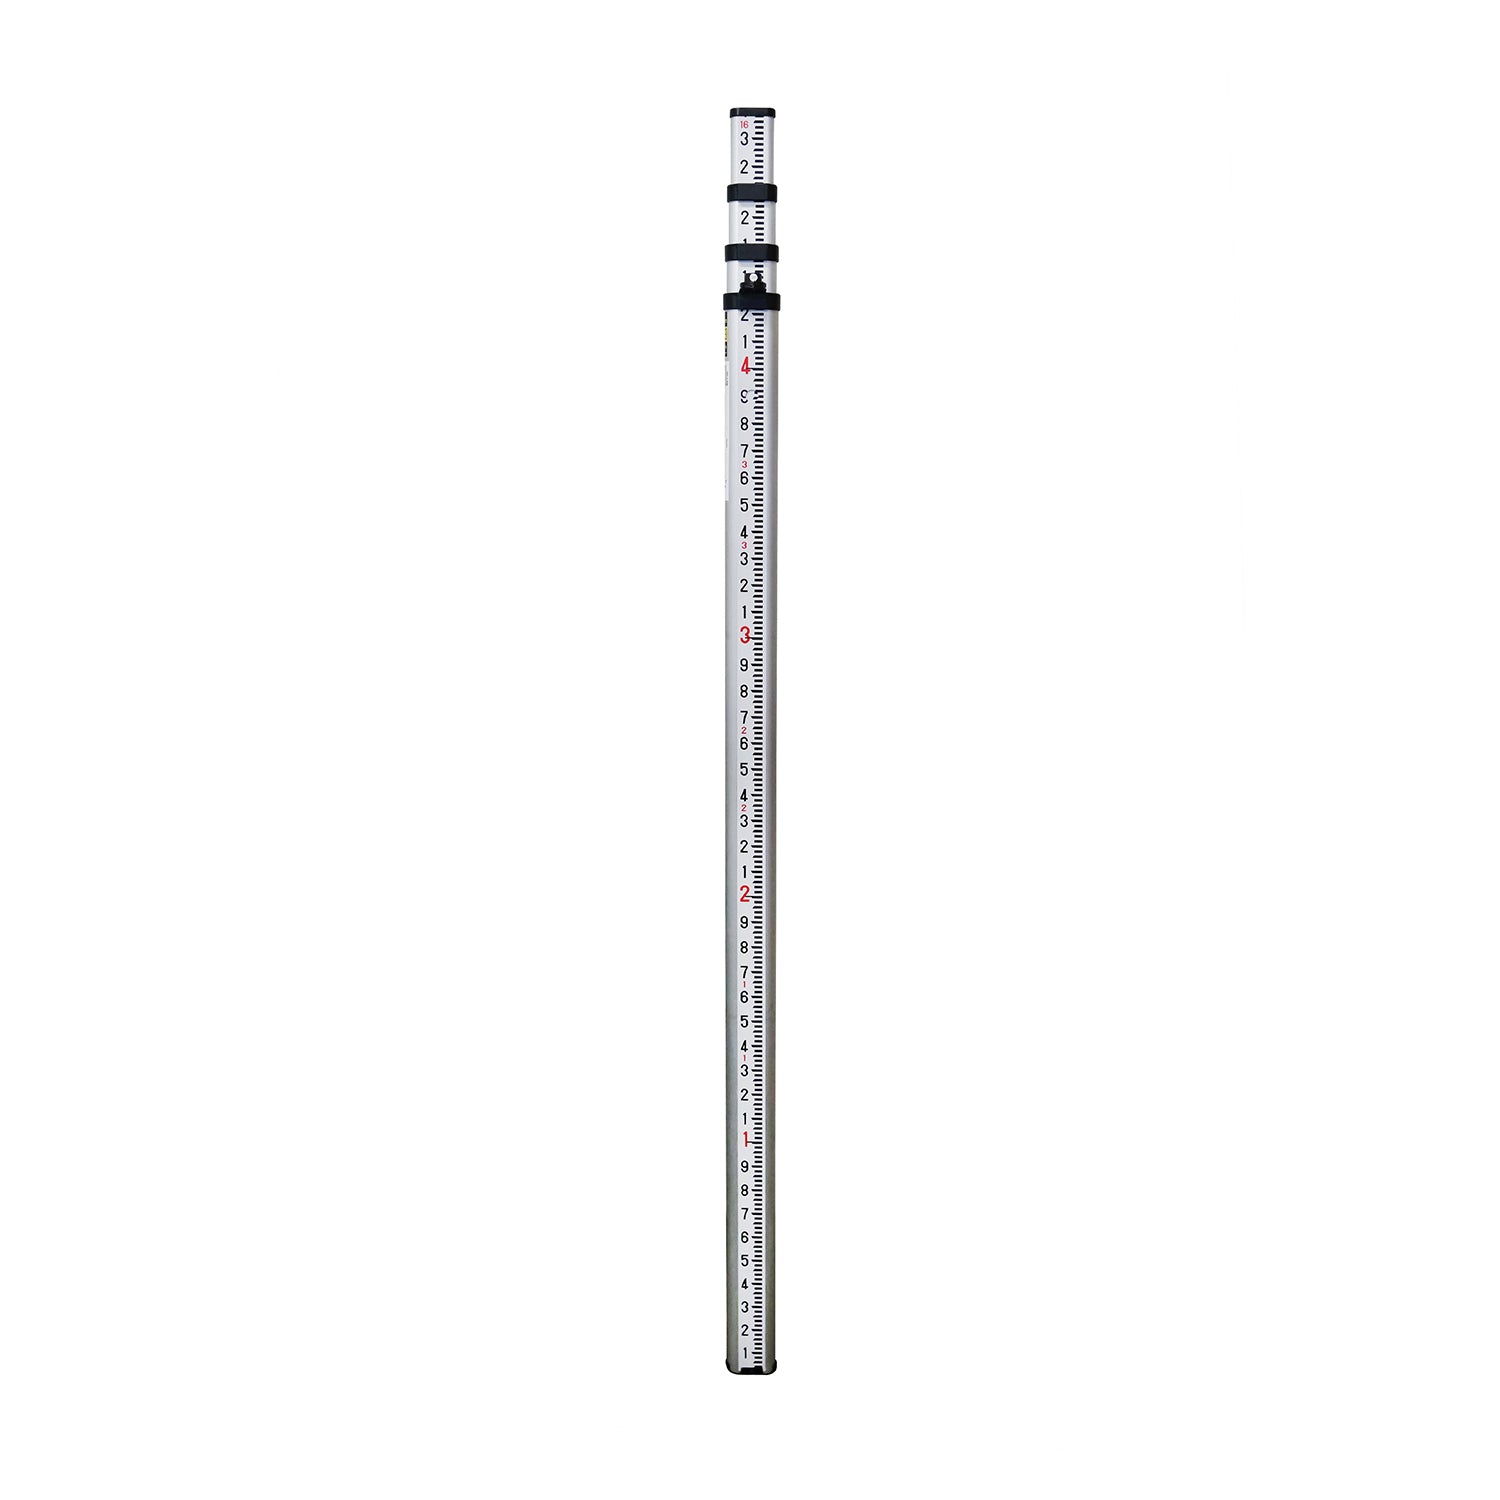 GeoMax 16.4 ft Dual Face Telescopic Level Pole (Ft, 10ths, 100ths) -Rods, Poles & Accessories- eGPS Solutions Inc.